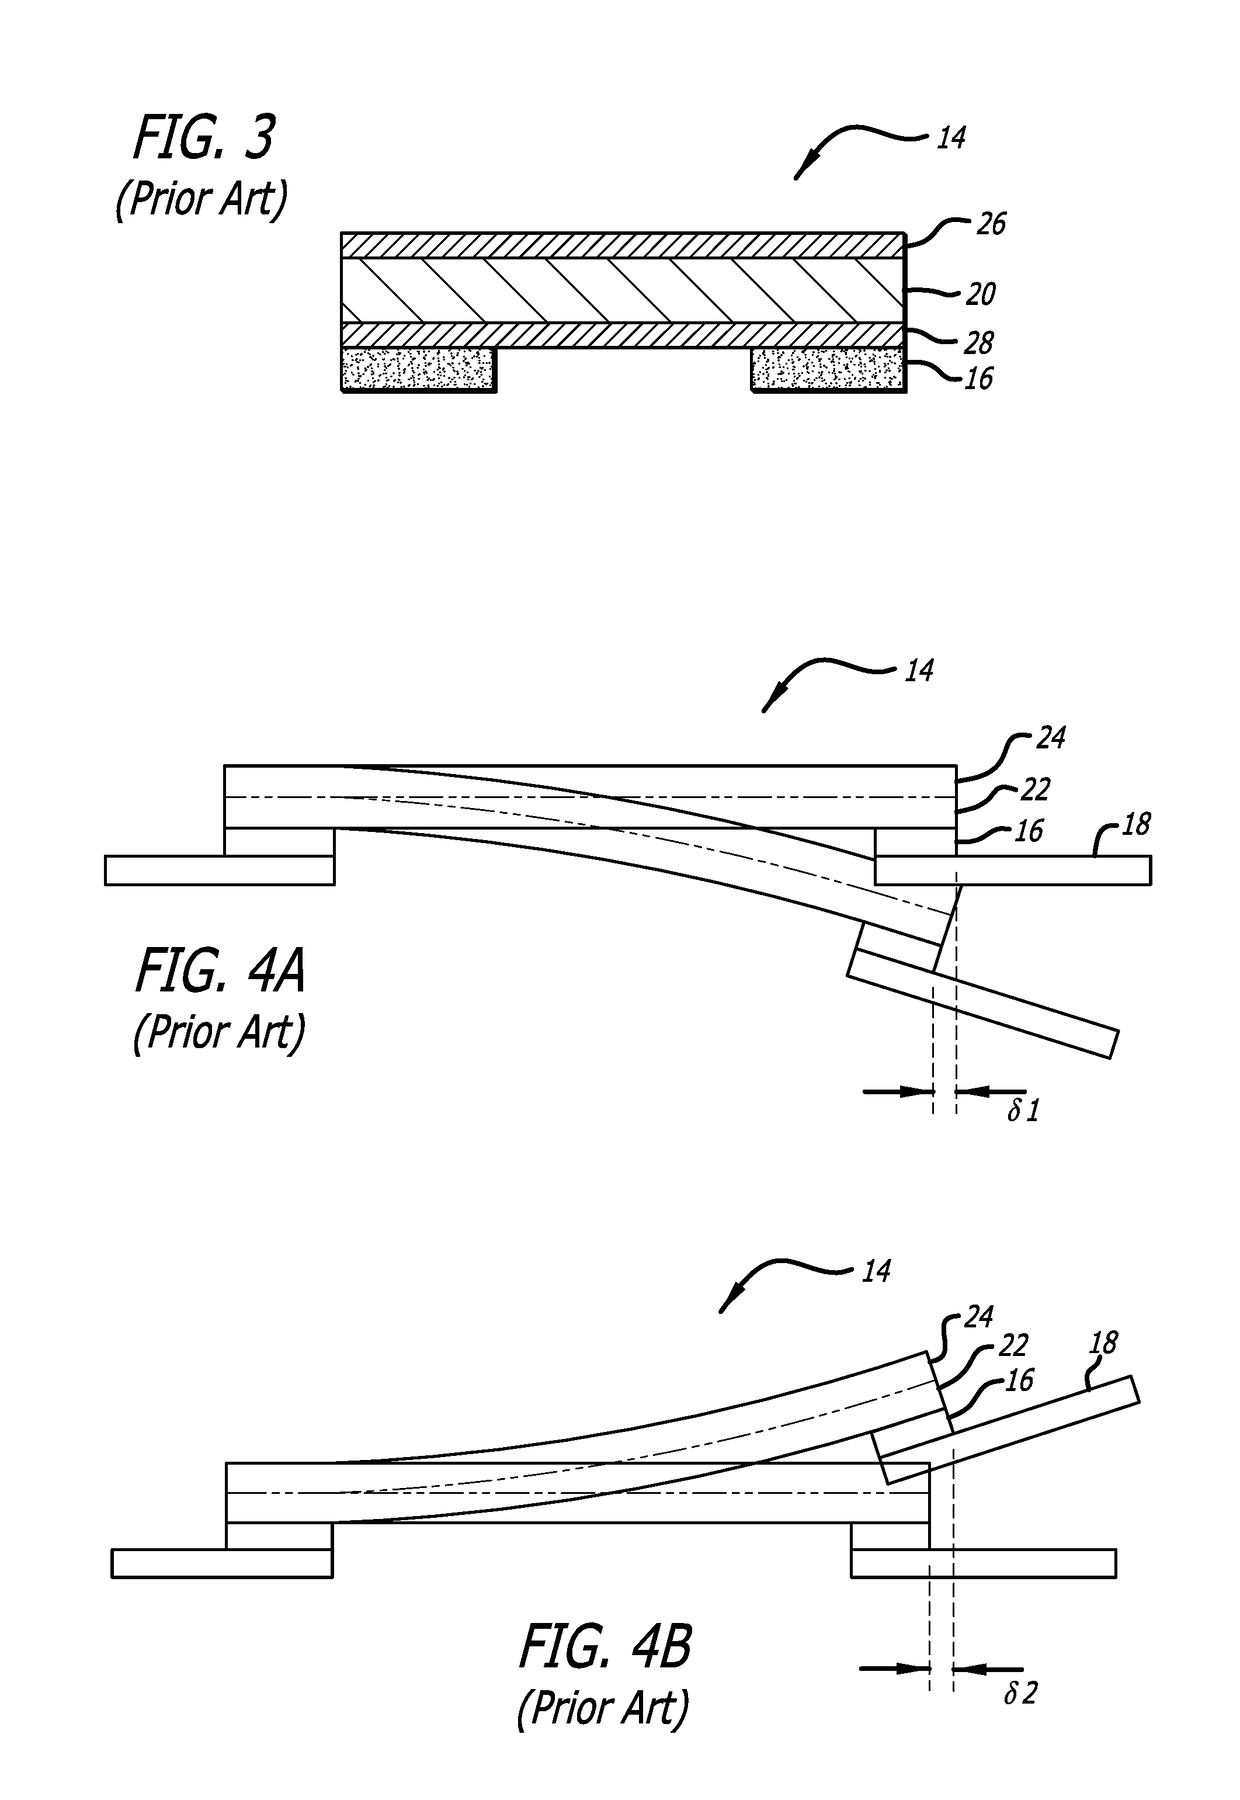 Multi-Layer PZT Microactuator Having A Poled But Inactive PZT Constraining Layer